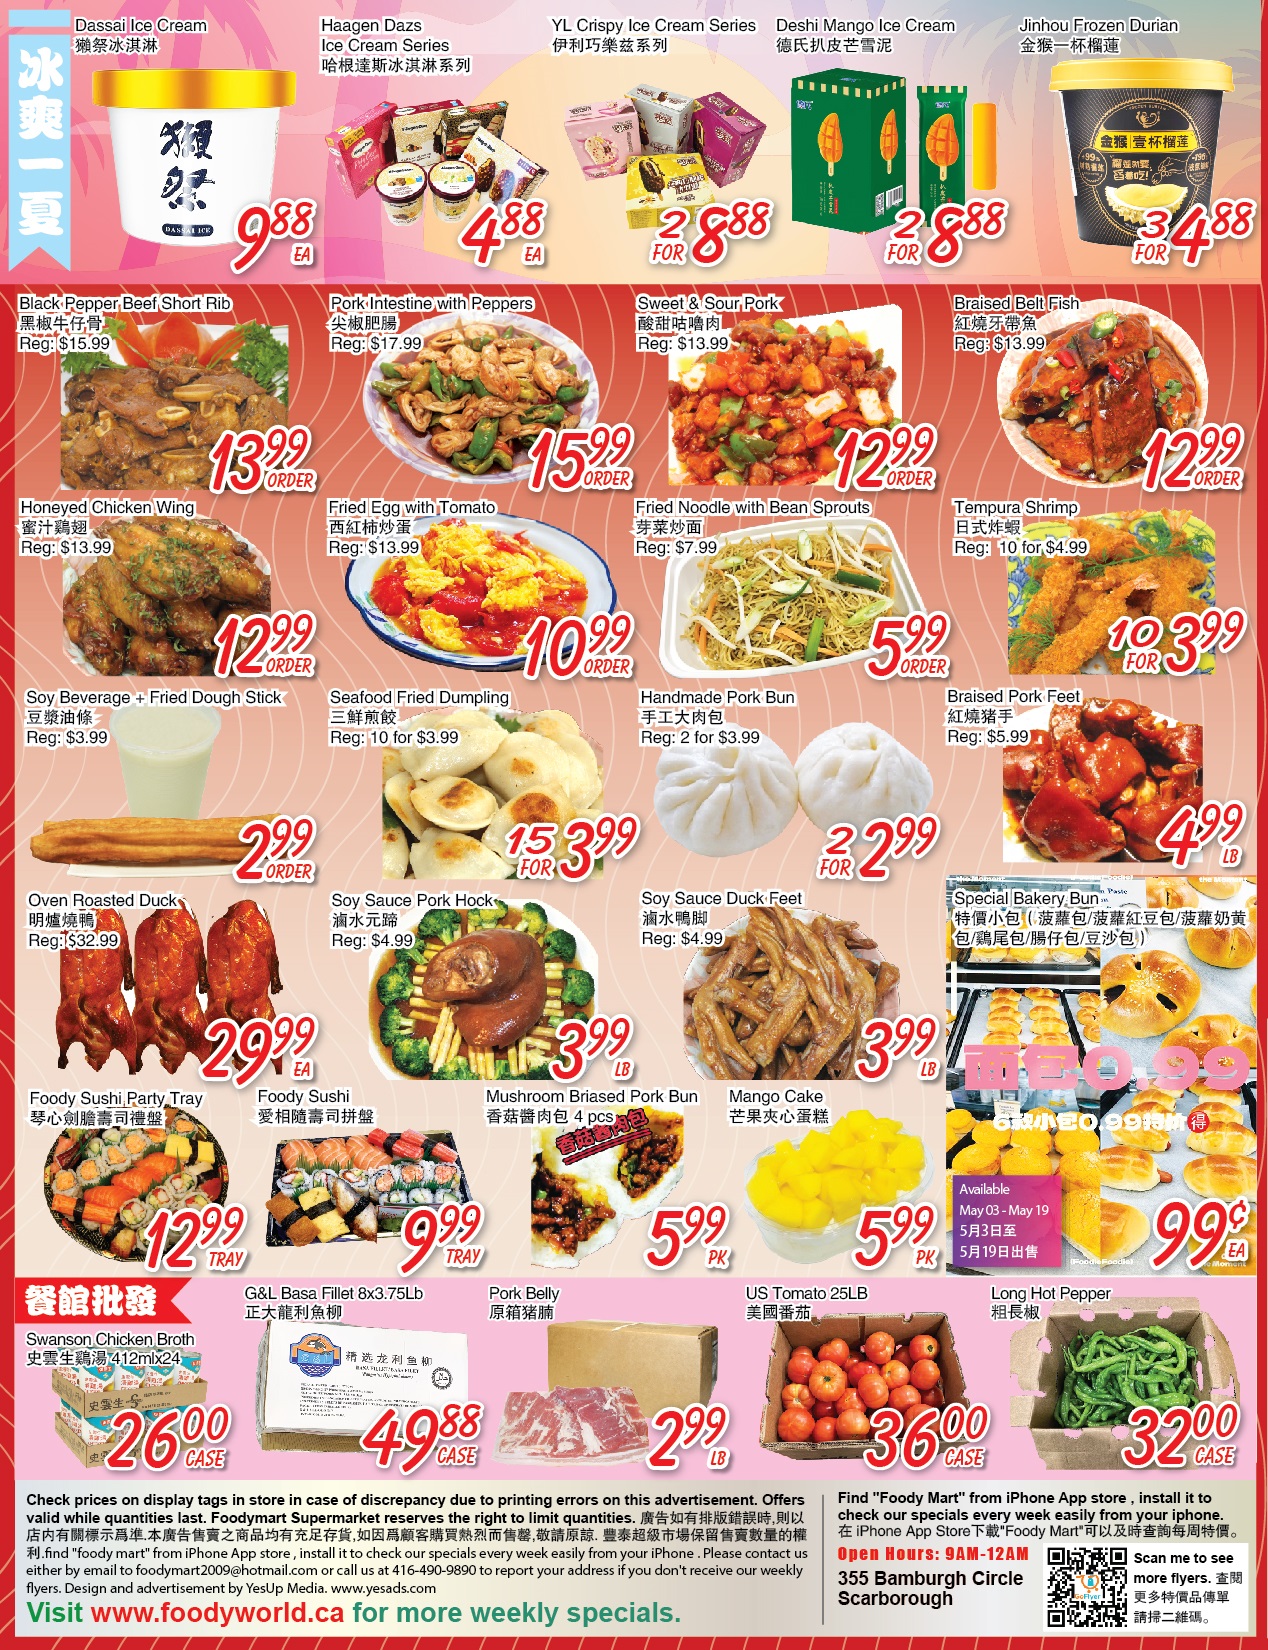 FOODY MART(Warden) Special From May 17 To May 23